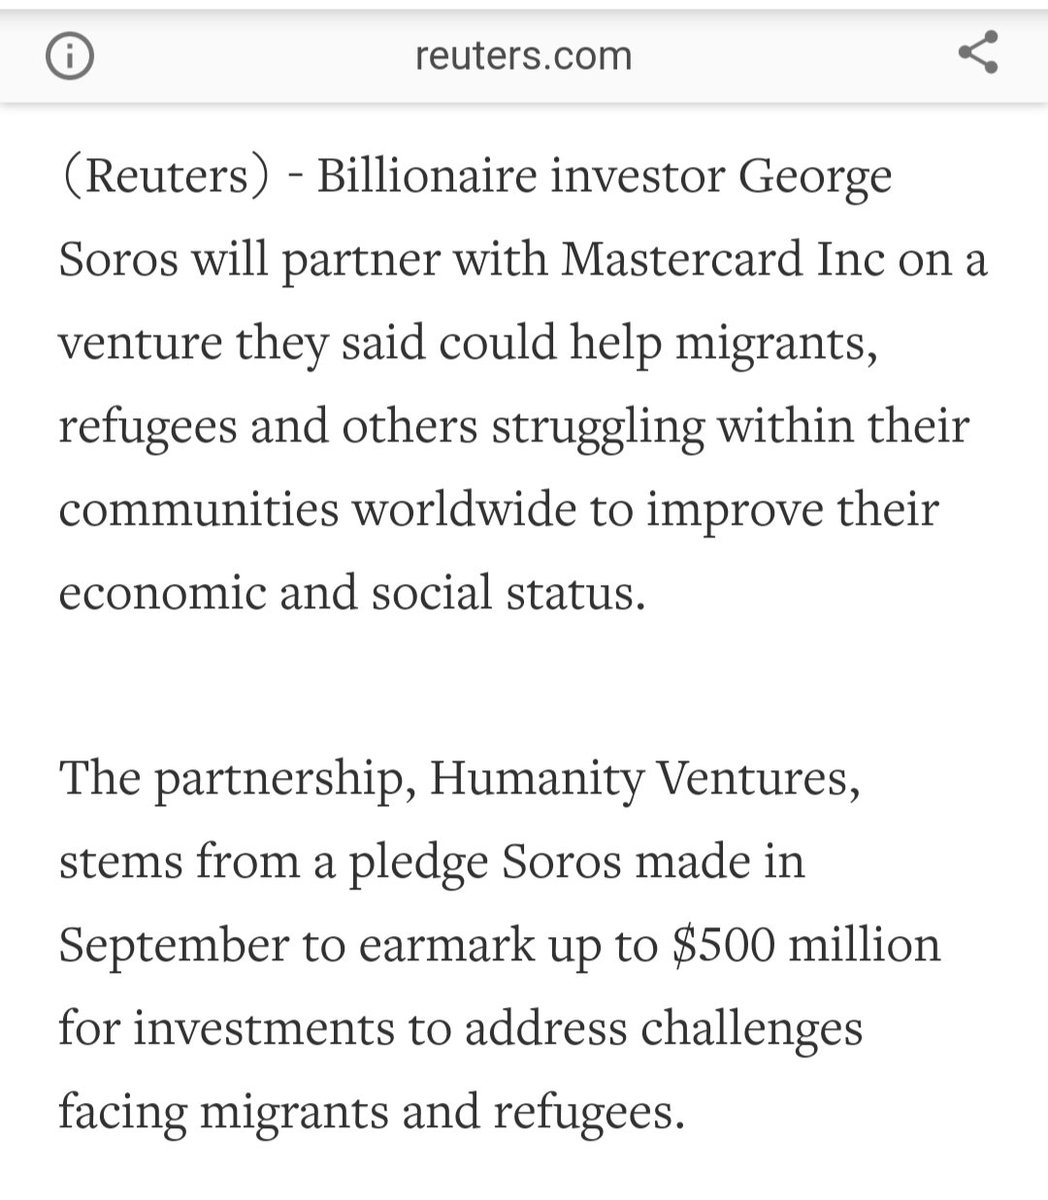 202) Also in June of 2016, Soros partnered with Mastercard to aid migrants and refugees.